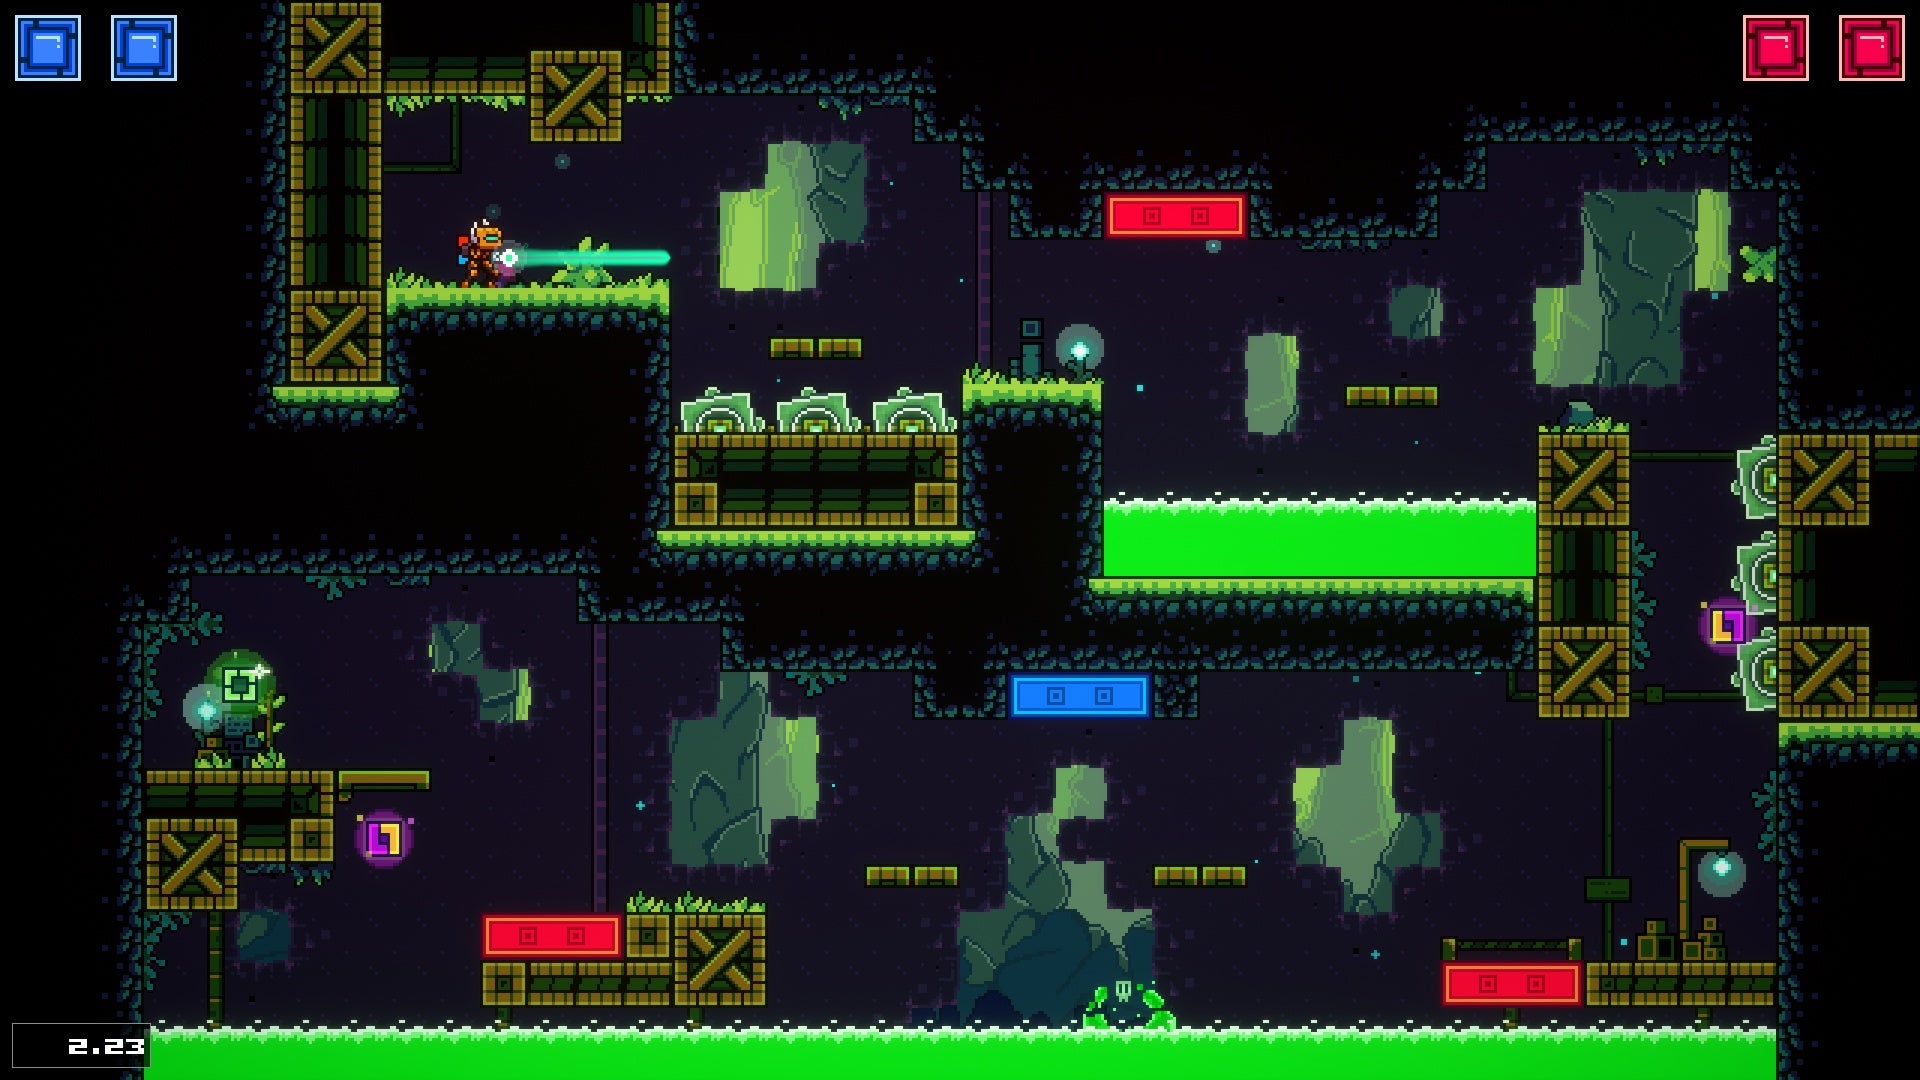 A screenshot of 2D platformer Super Magbot, showing a level in a cave featuring occasional red and blue magnetic platforms and a lot of spinning blades and green acid ready to kill you in between.